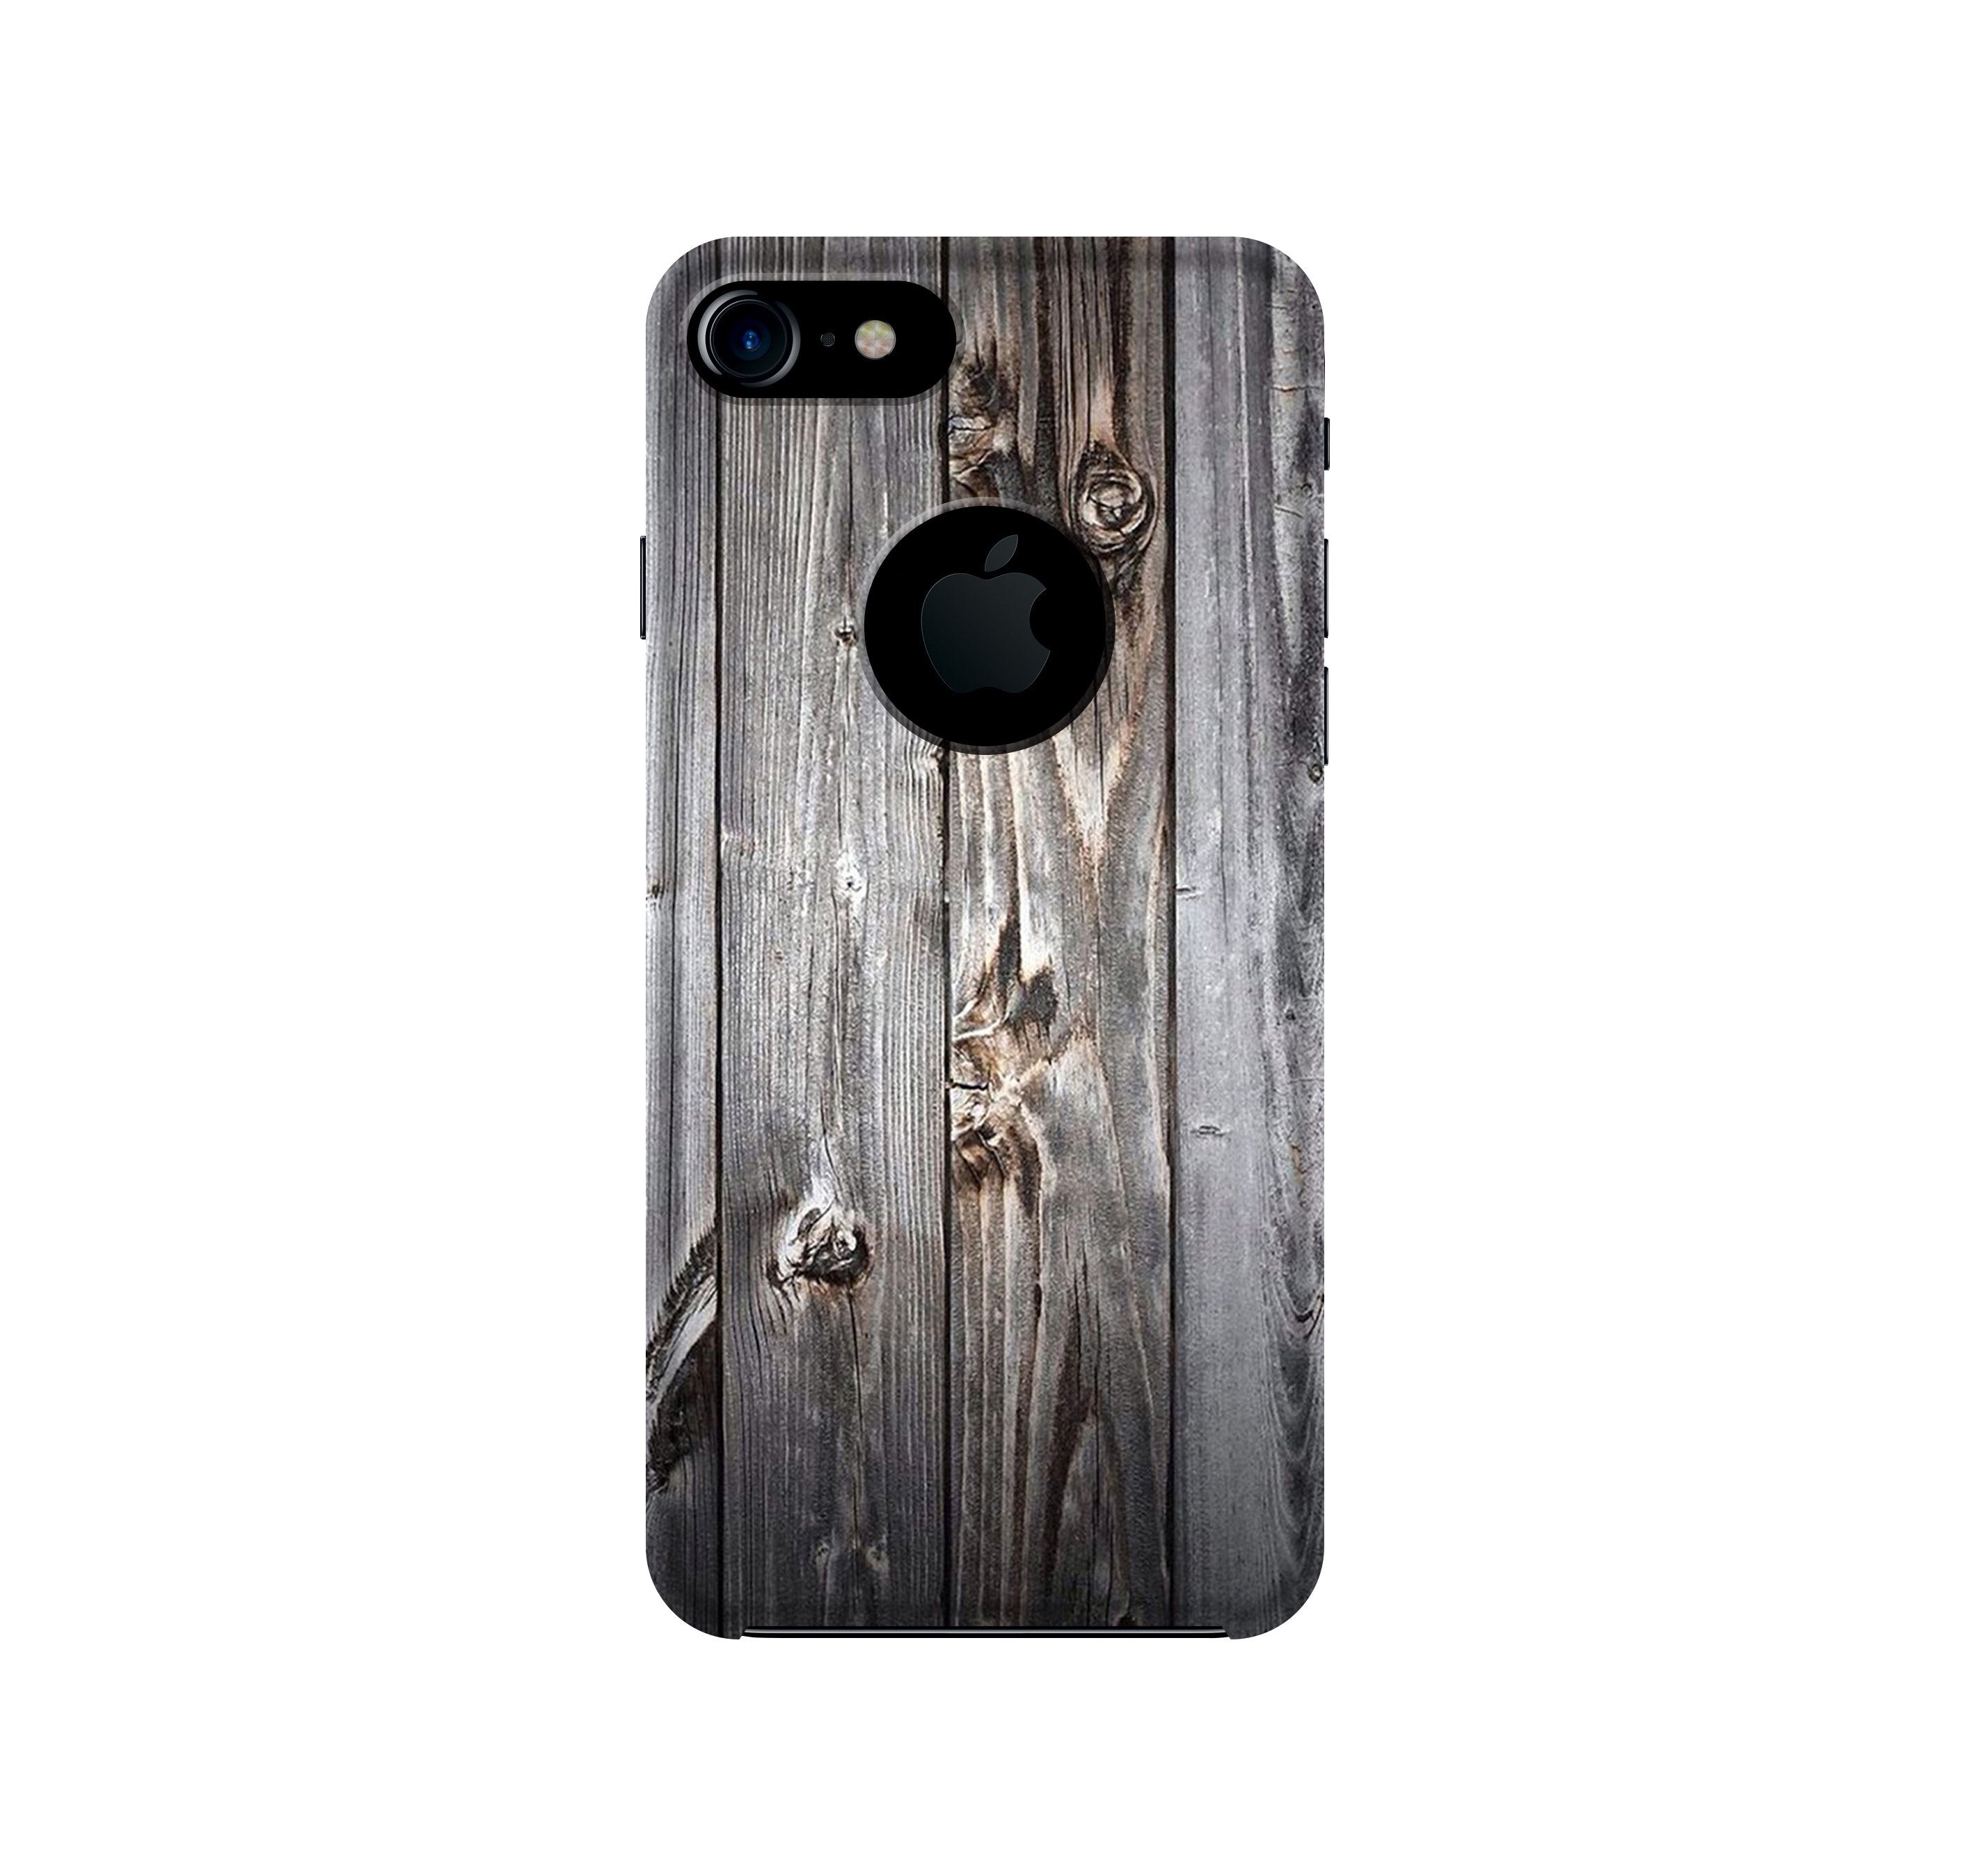 Wooden Look Case for iPhone 7 logo cut(Design - 114)